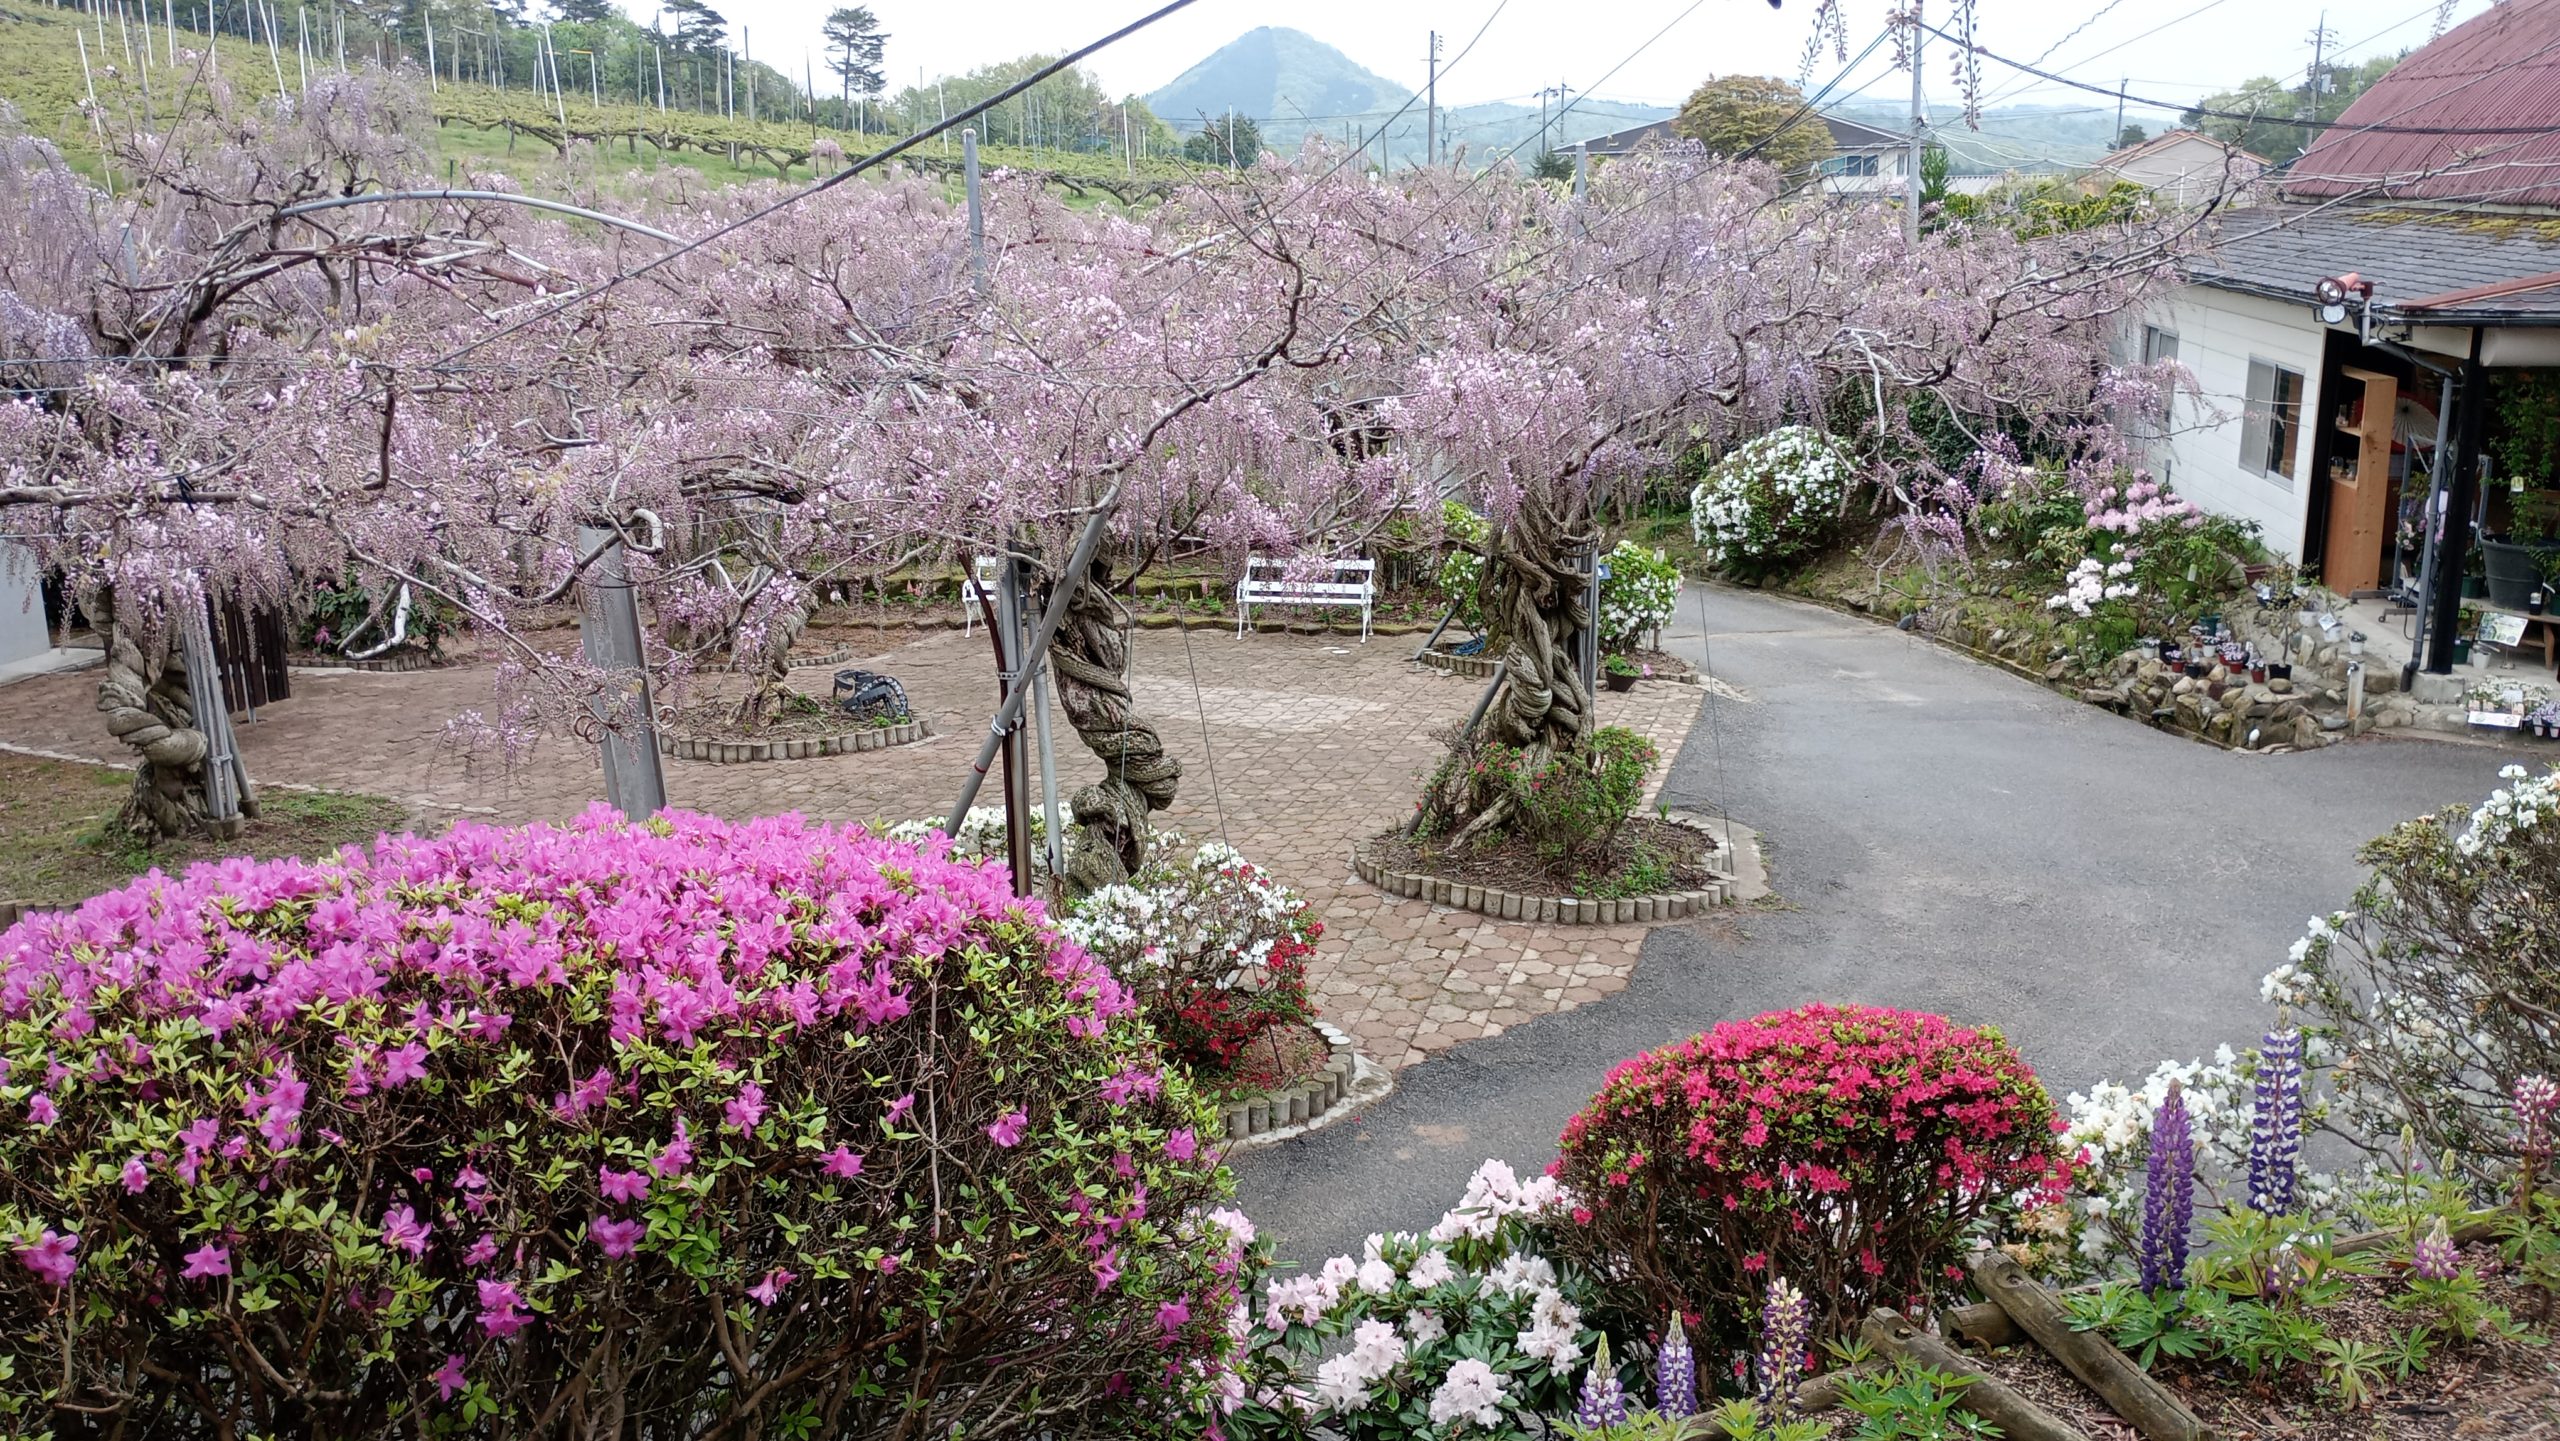 【2024 Wisteria Festival Park open】　【Wisteria 50% flowering】　【Lupinus Best time for viewing】